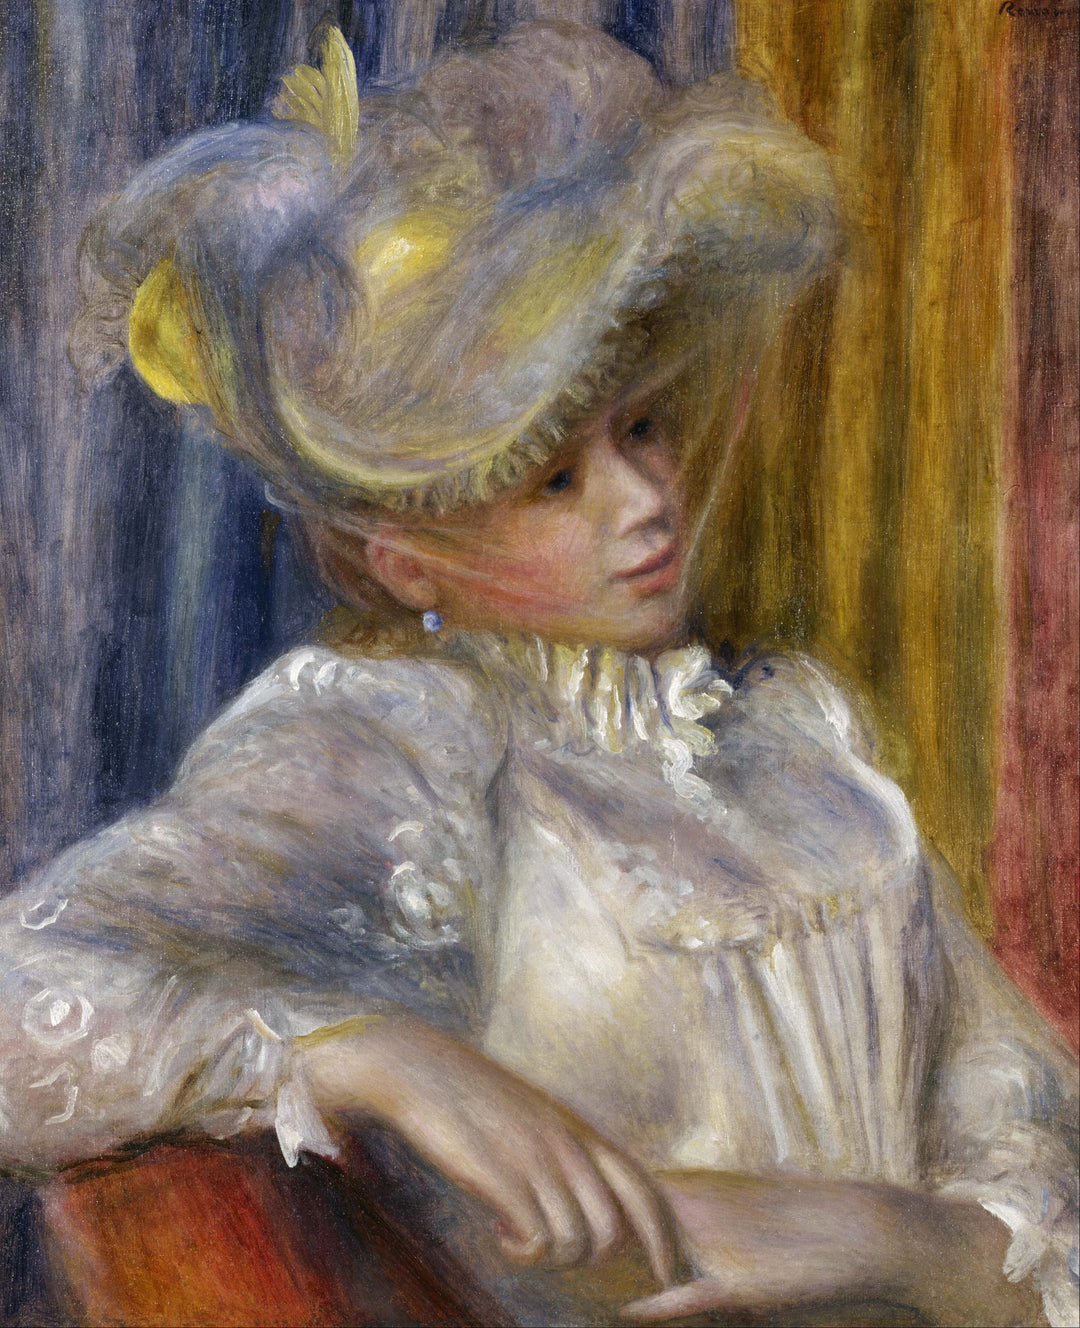 Woman with a Hat by Pierre-Auguste Renoir Reproduction for Sale by Blue Surf Art